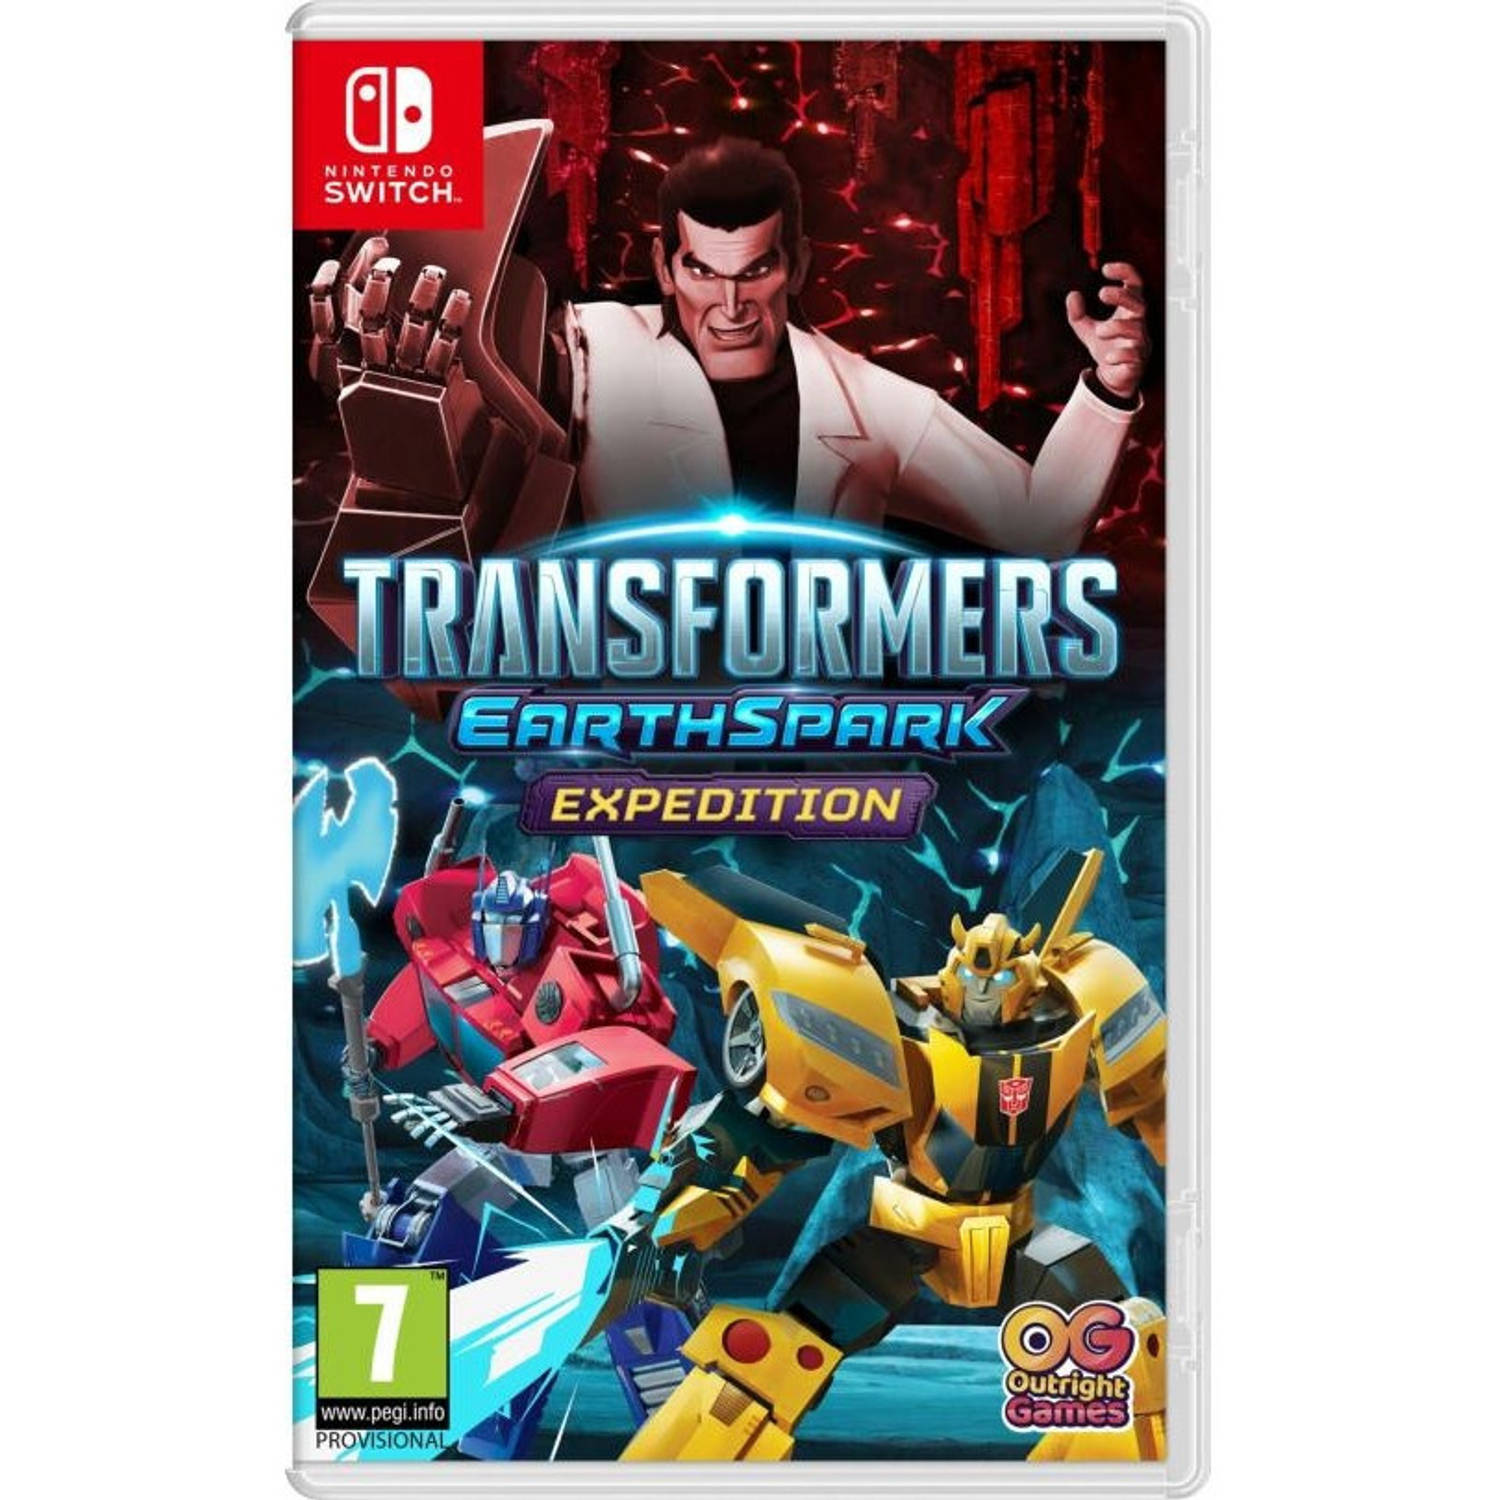 Transformers: Earthspark Expedition Nintendo Switch